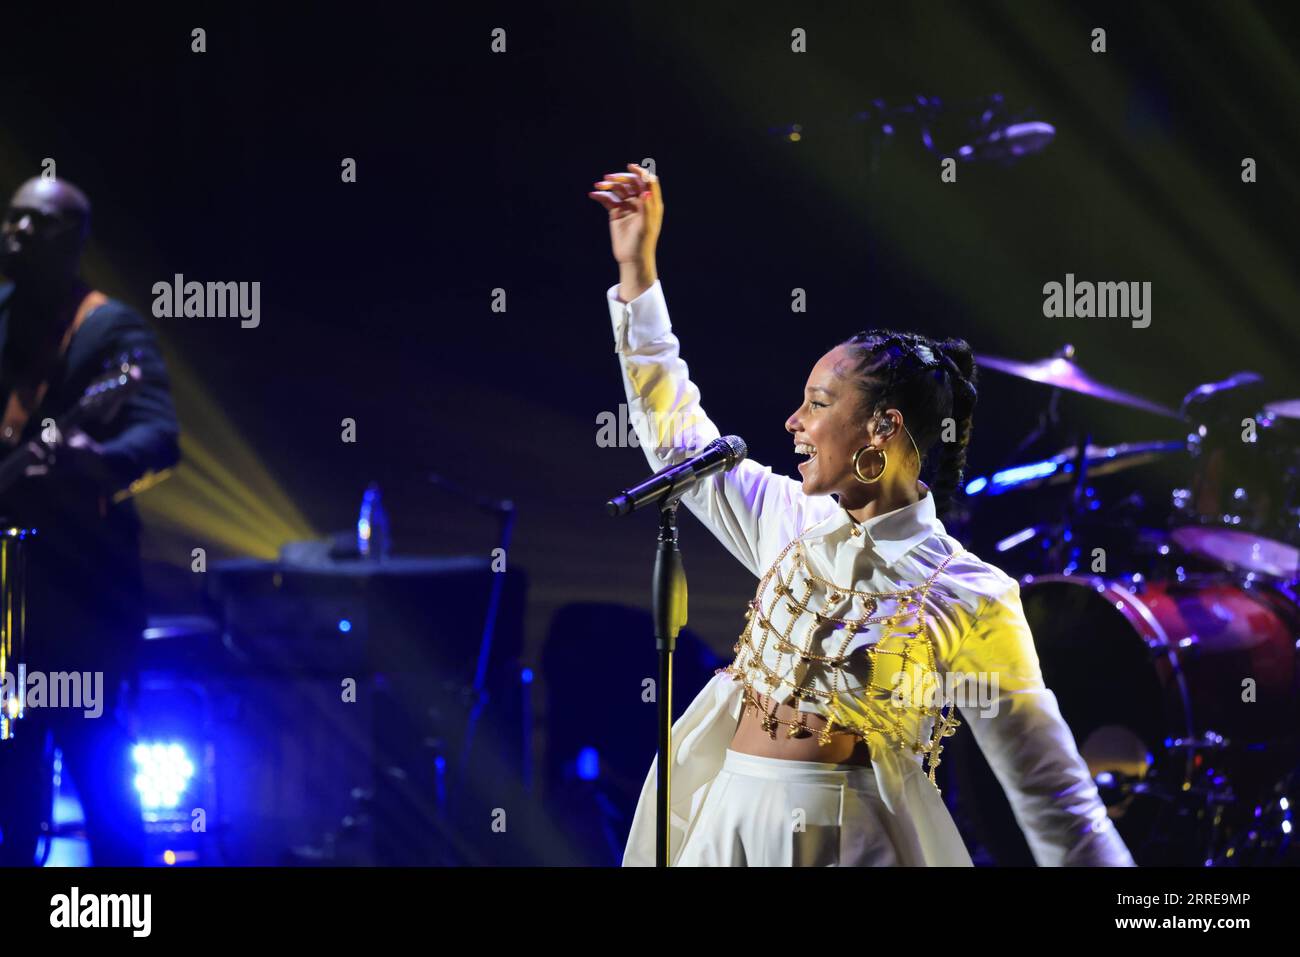 220212 -- ALULA, Feb. 12, 2022 -- Alicia Keys performs during the One Night Only concert in AlUla, Saudi Arabia, Feb. 11, 2022.  SAUDI ARABIA-ALULA-CONCERT-ALICIA KEYS WangxHaizhou PUBLICATIONxNOTxINxCHN Stock Photo